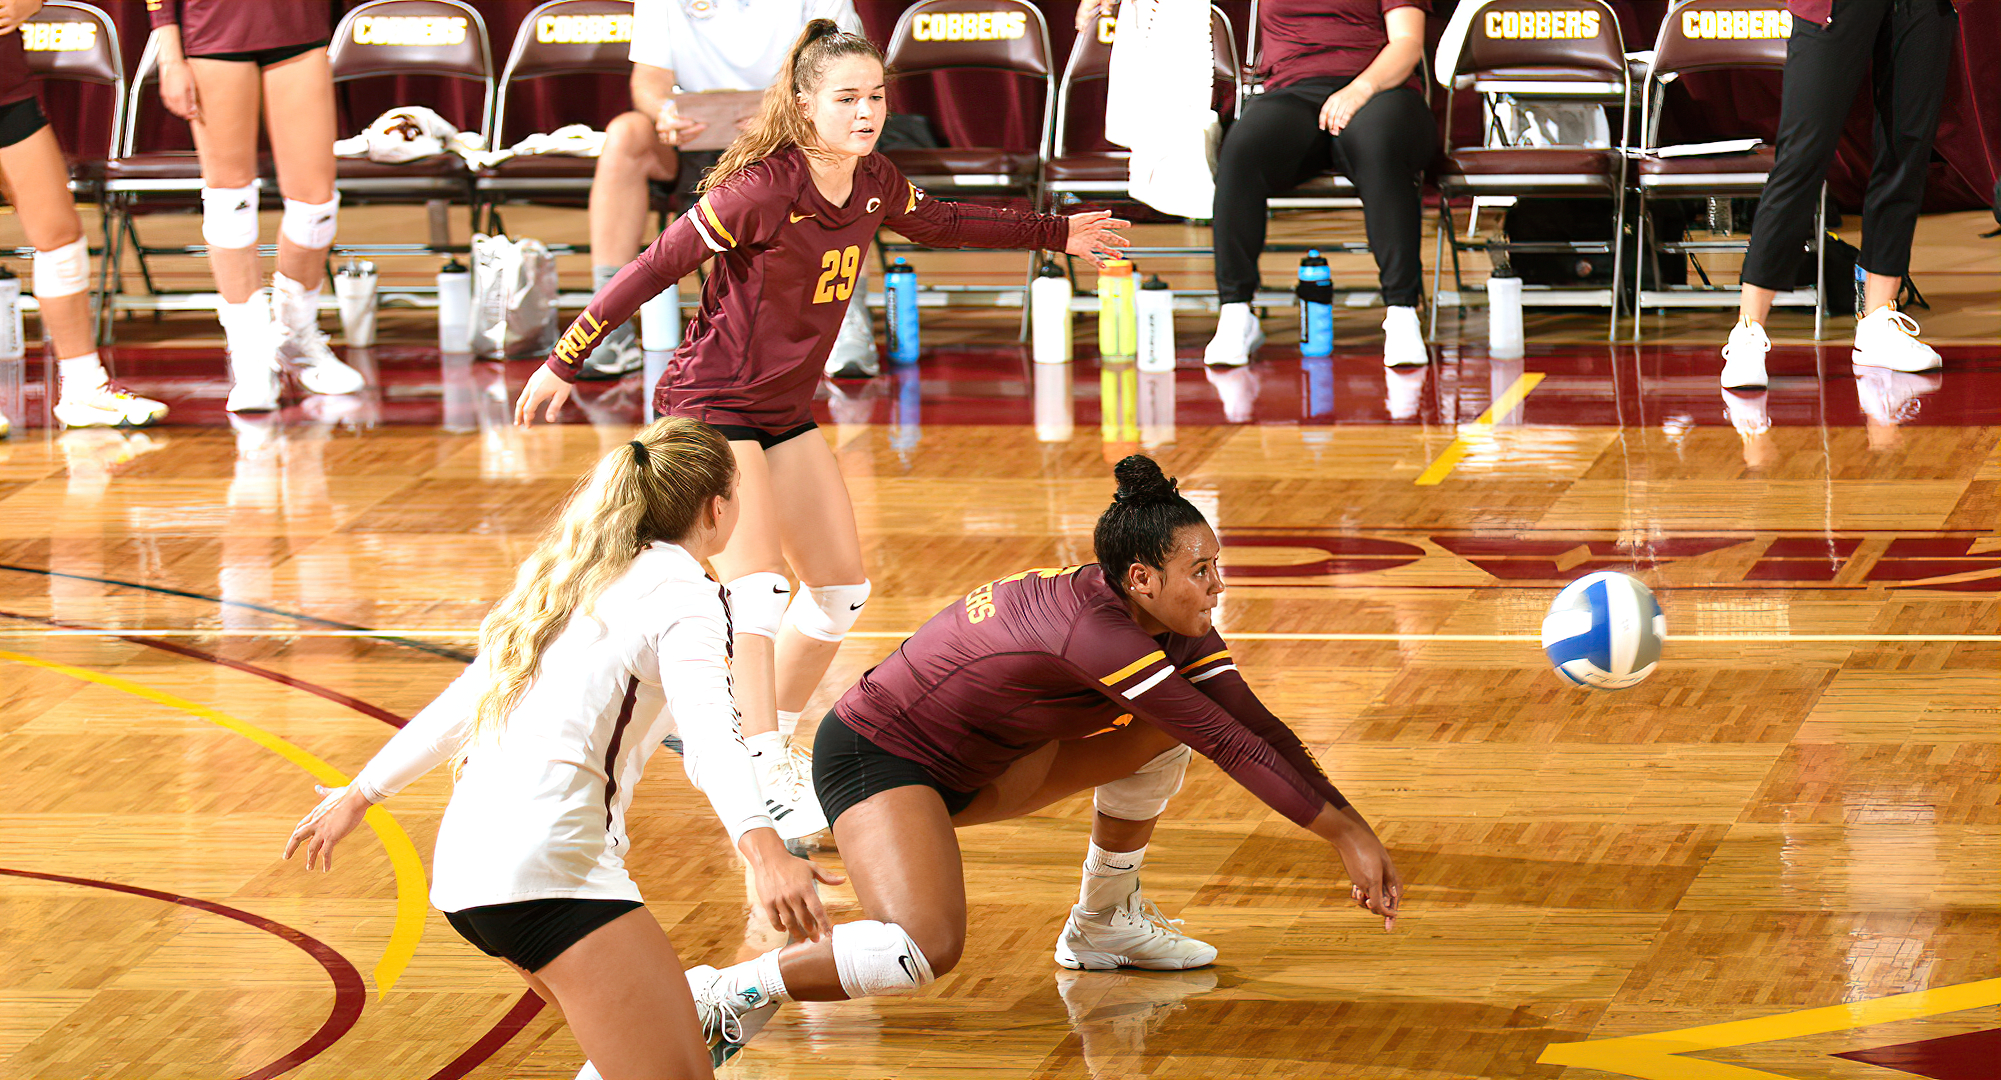 Anna Brakke (#2) had five digs and six kills in the Cobbers' match at #24 Augsburg. Hanna Mooney (#29) added eight digs.